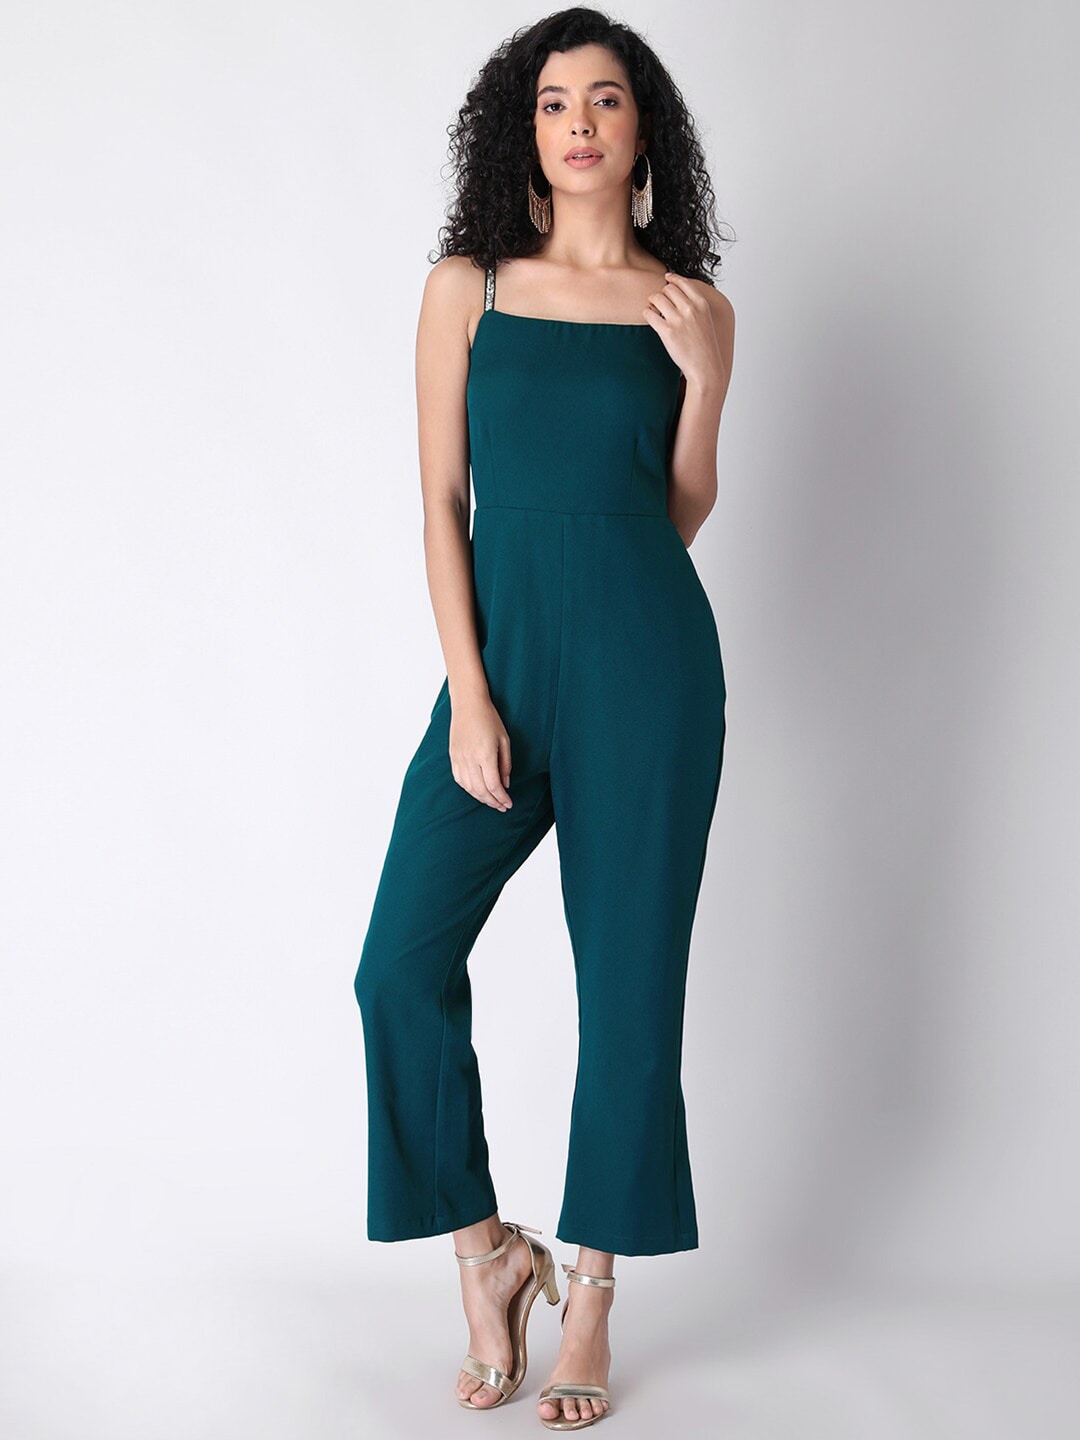 FabAlley Green Solid Shoulder Strap Basic Jumpsuit Price in India